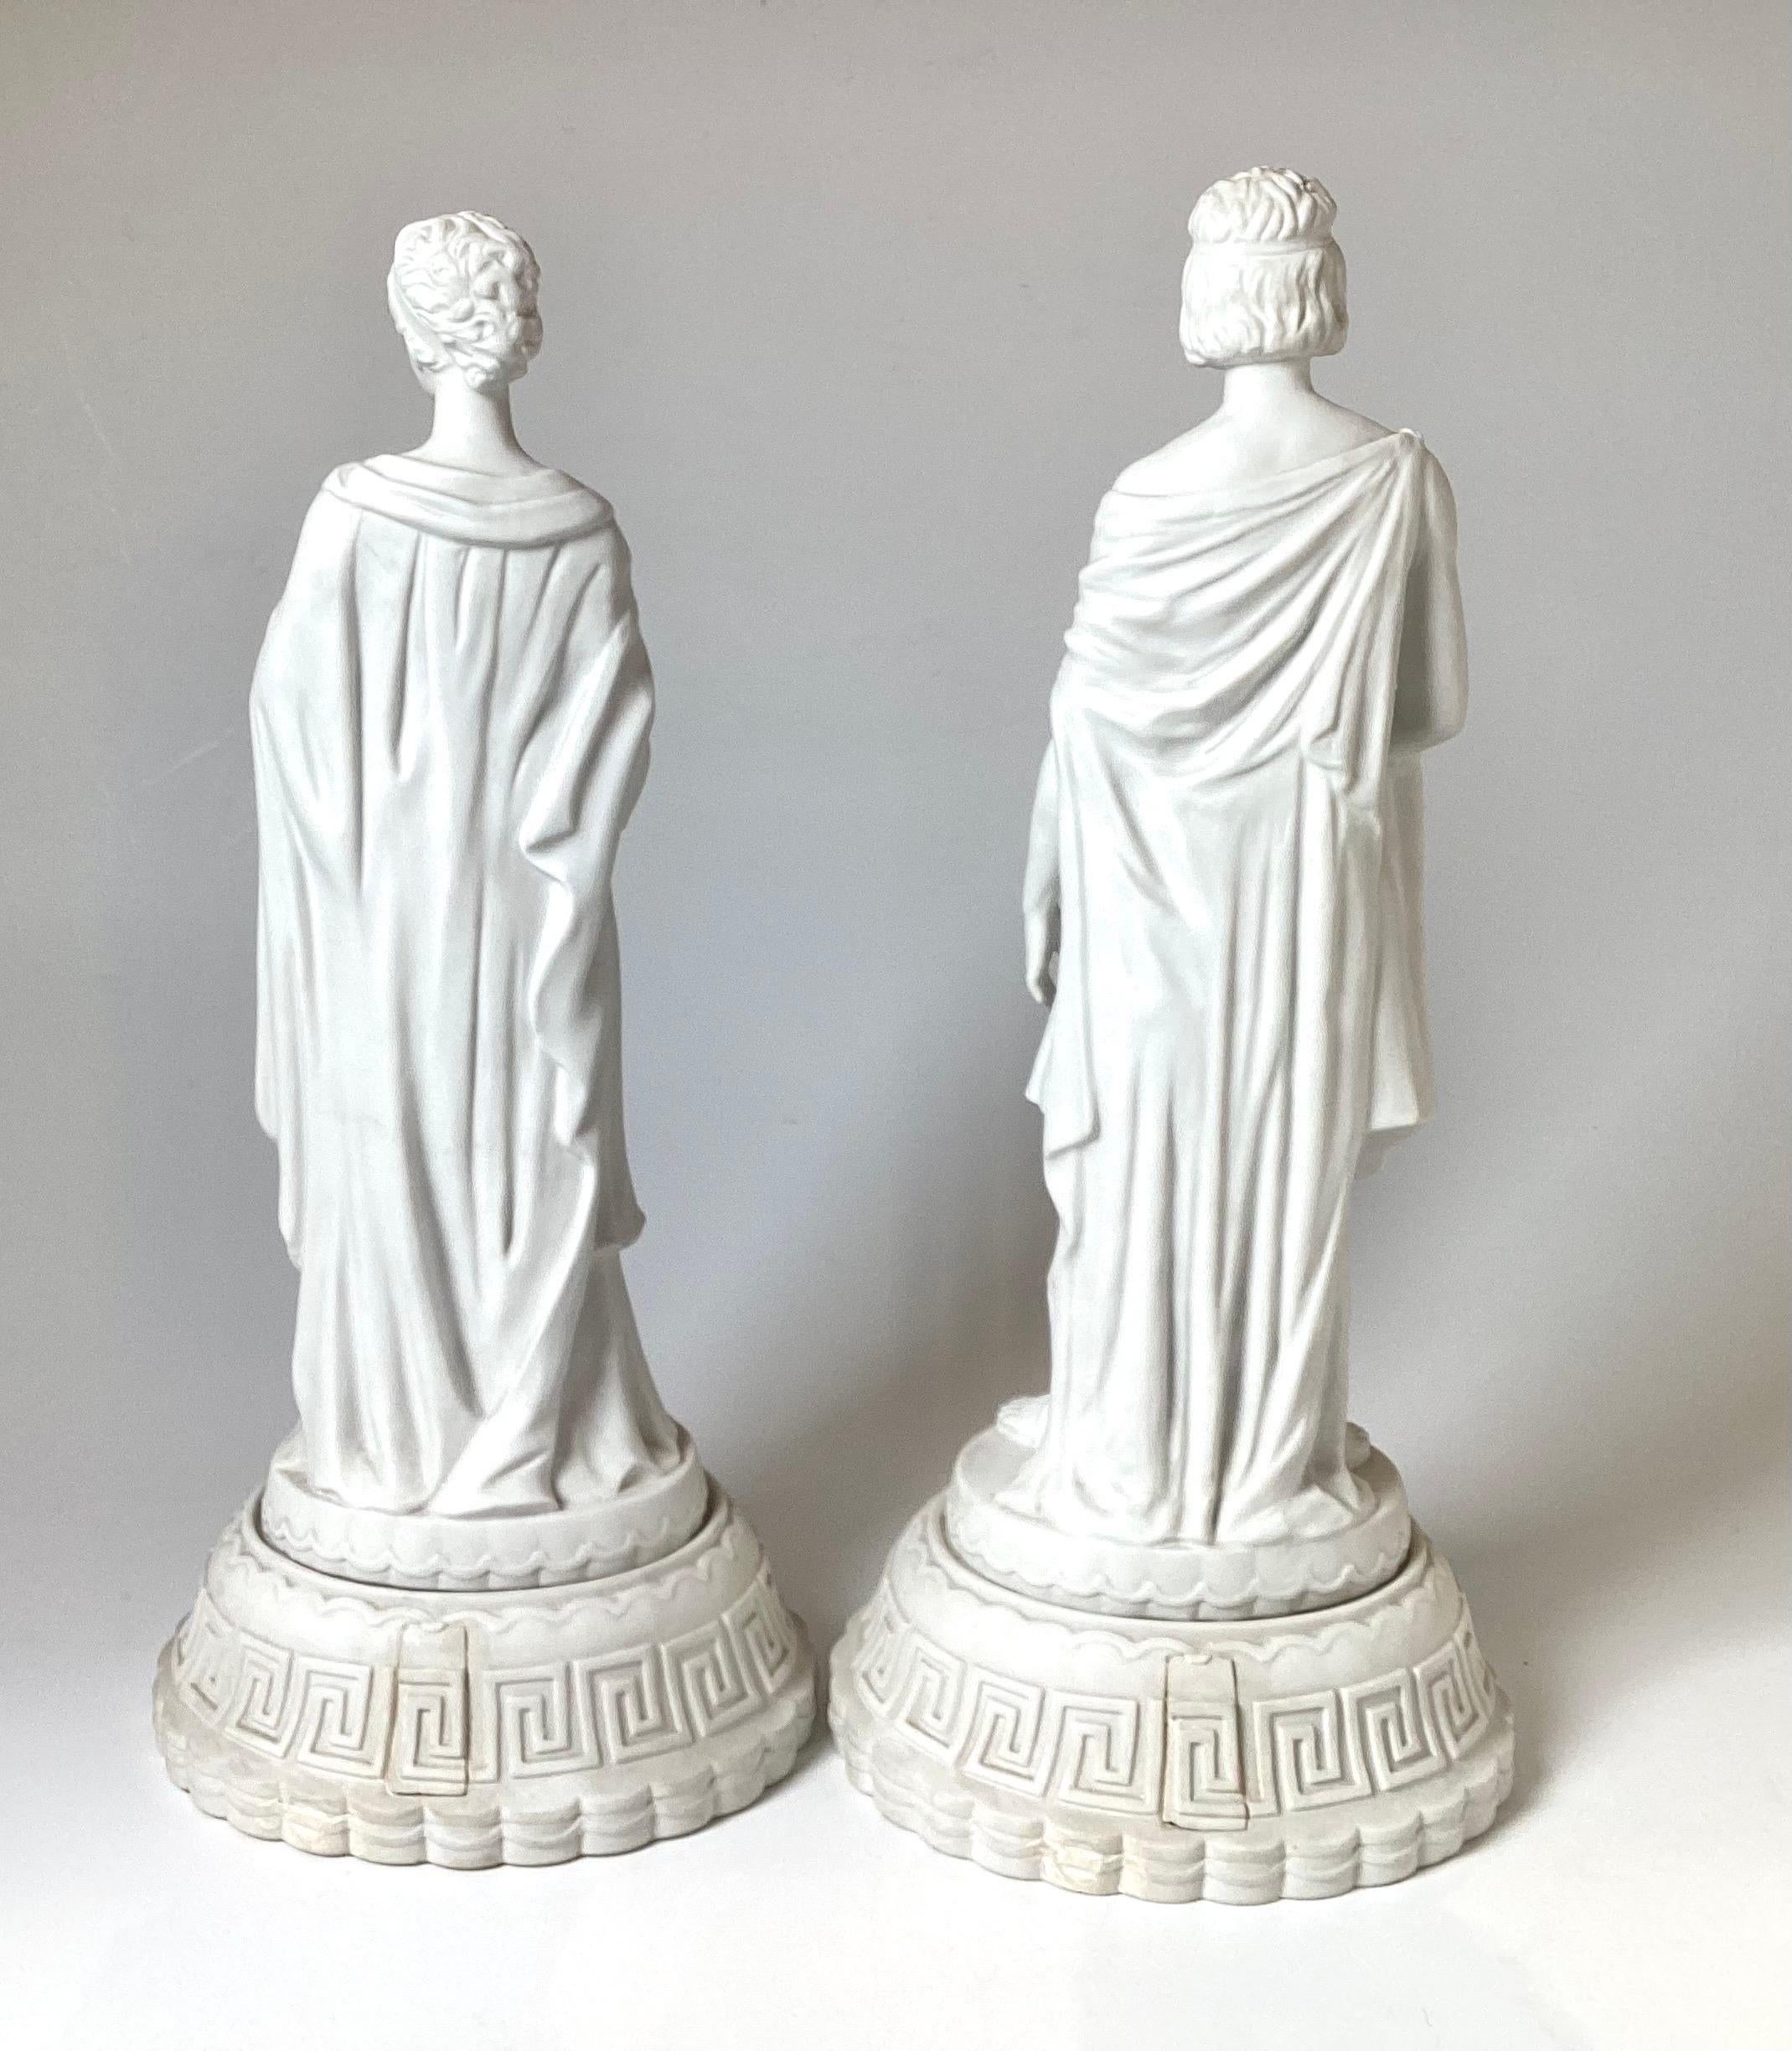 A Pair of Parian porcelain bisque neoclassical statues of a Greek couple. The original pair in white bisque finish with Greek key decoration at the bases, European, possibly Italian, 17 inches tall